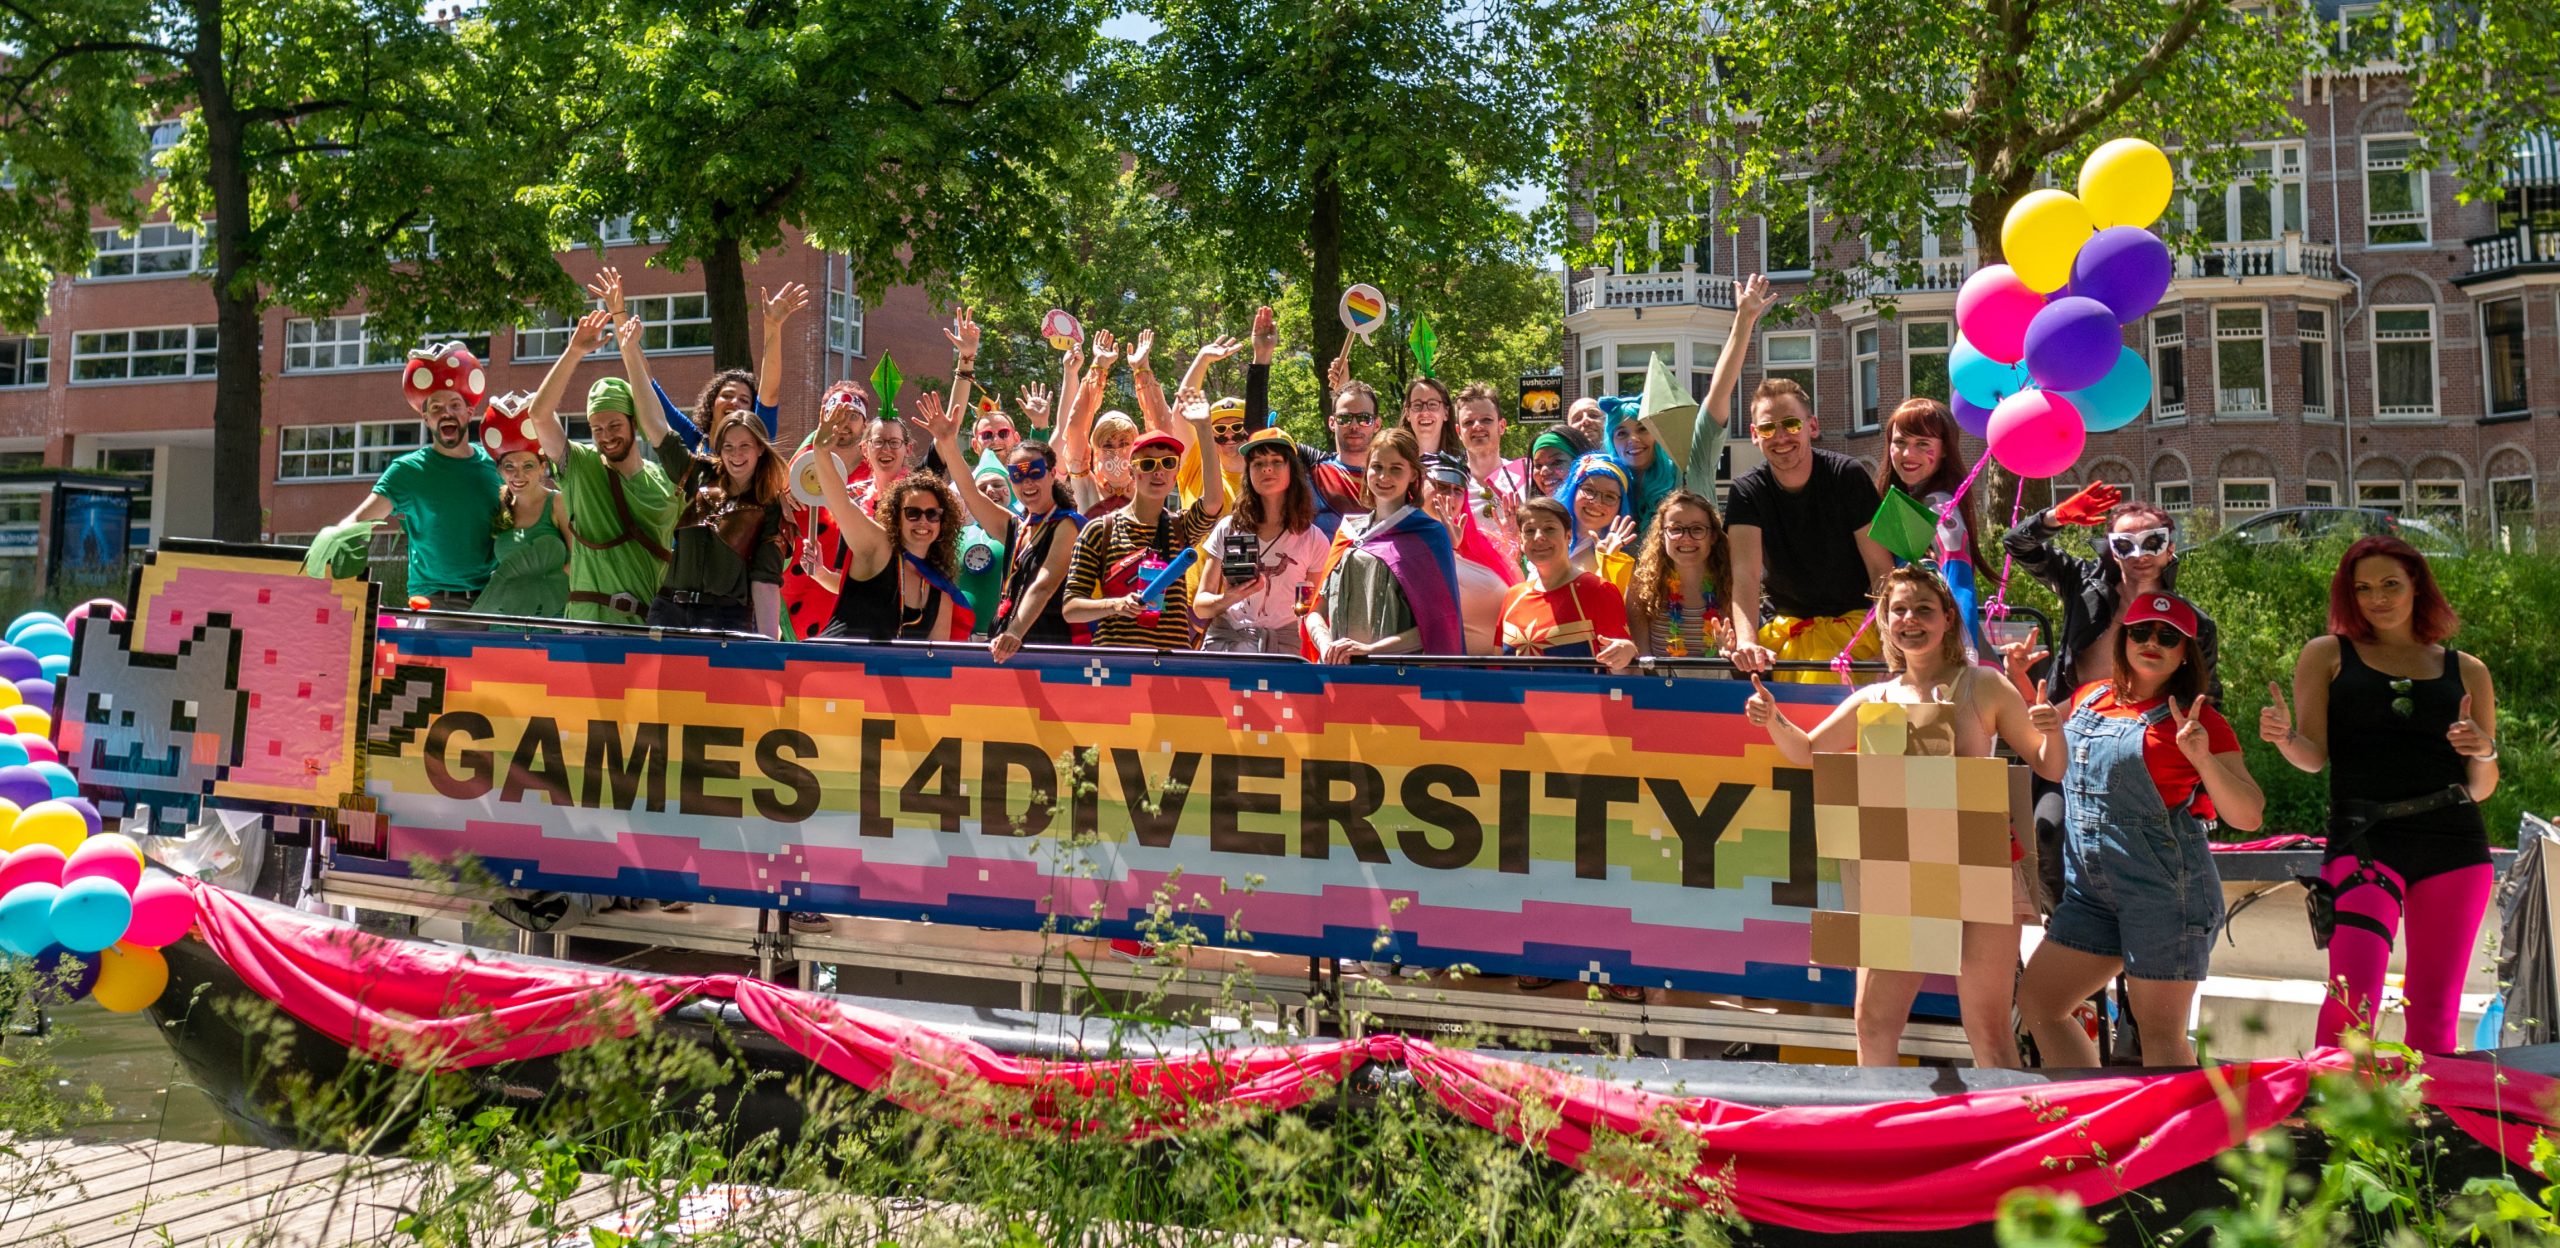 a group pictures of all pride 2019 attendees on the pride boat